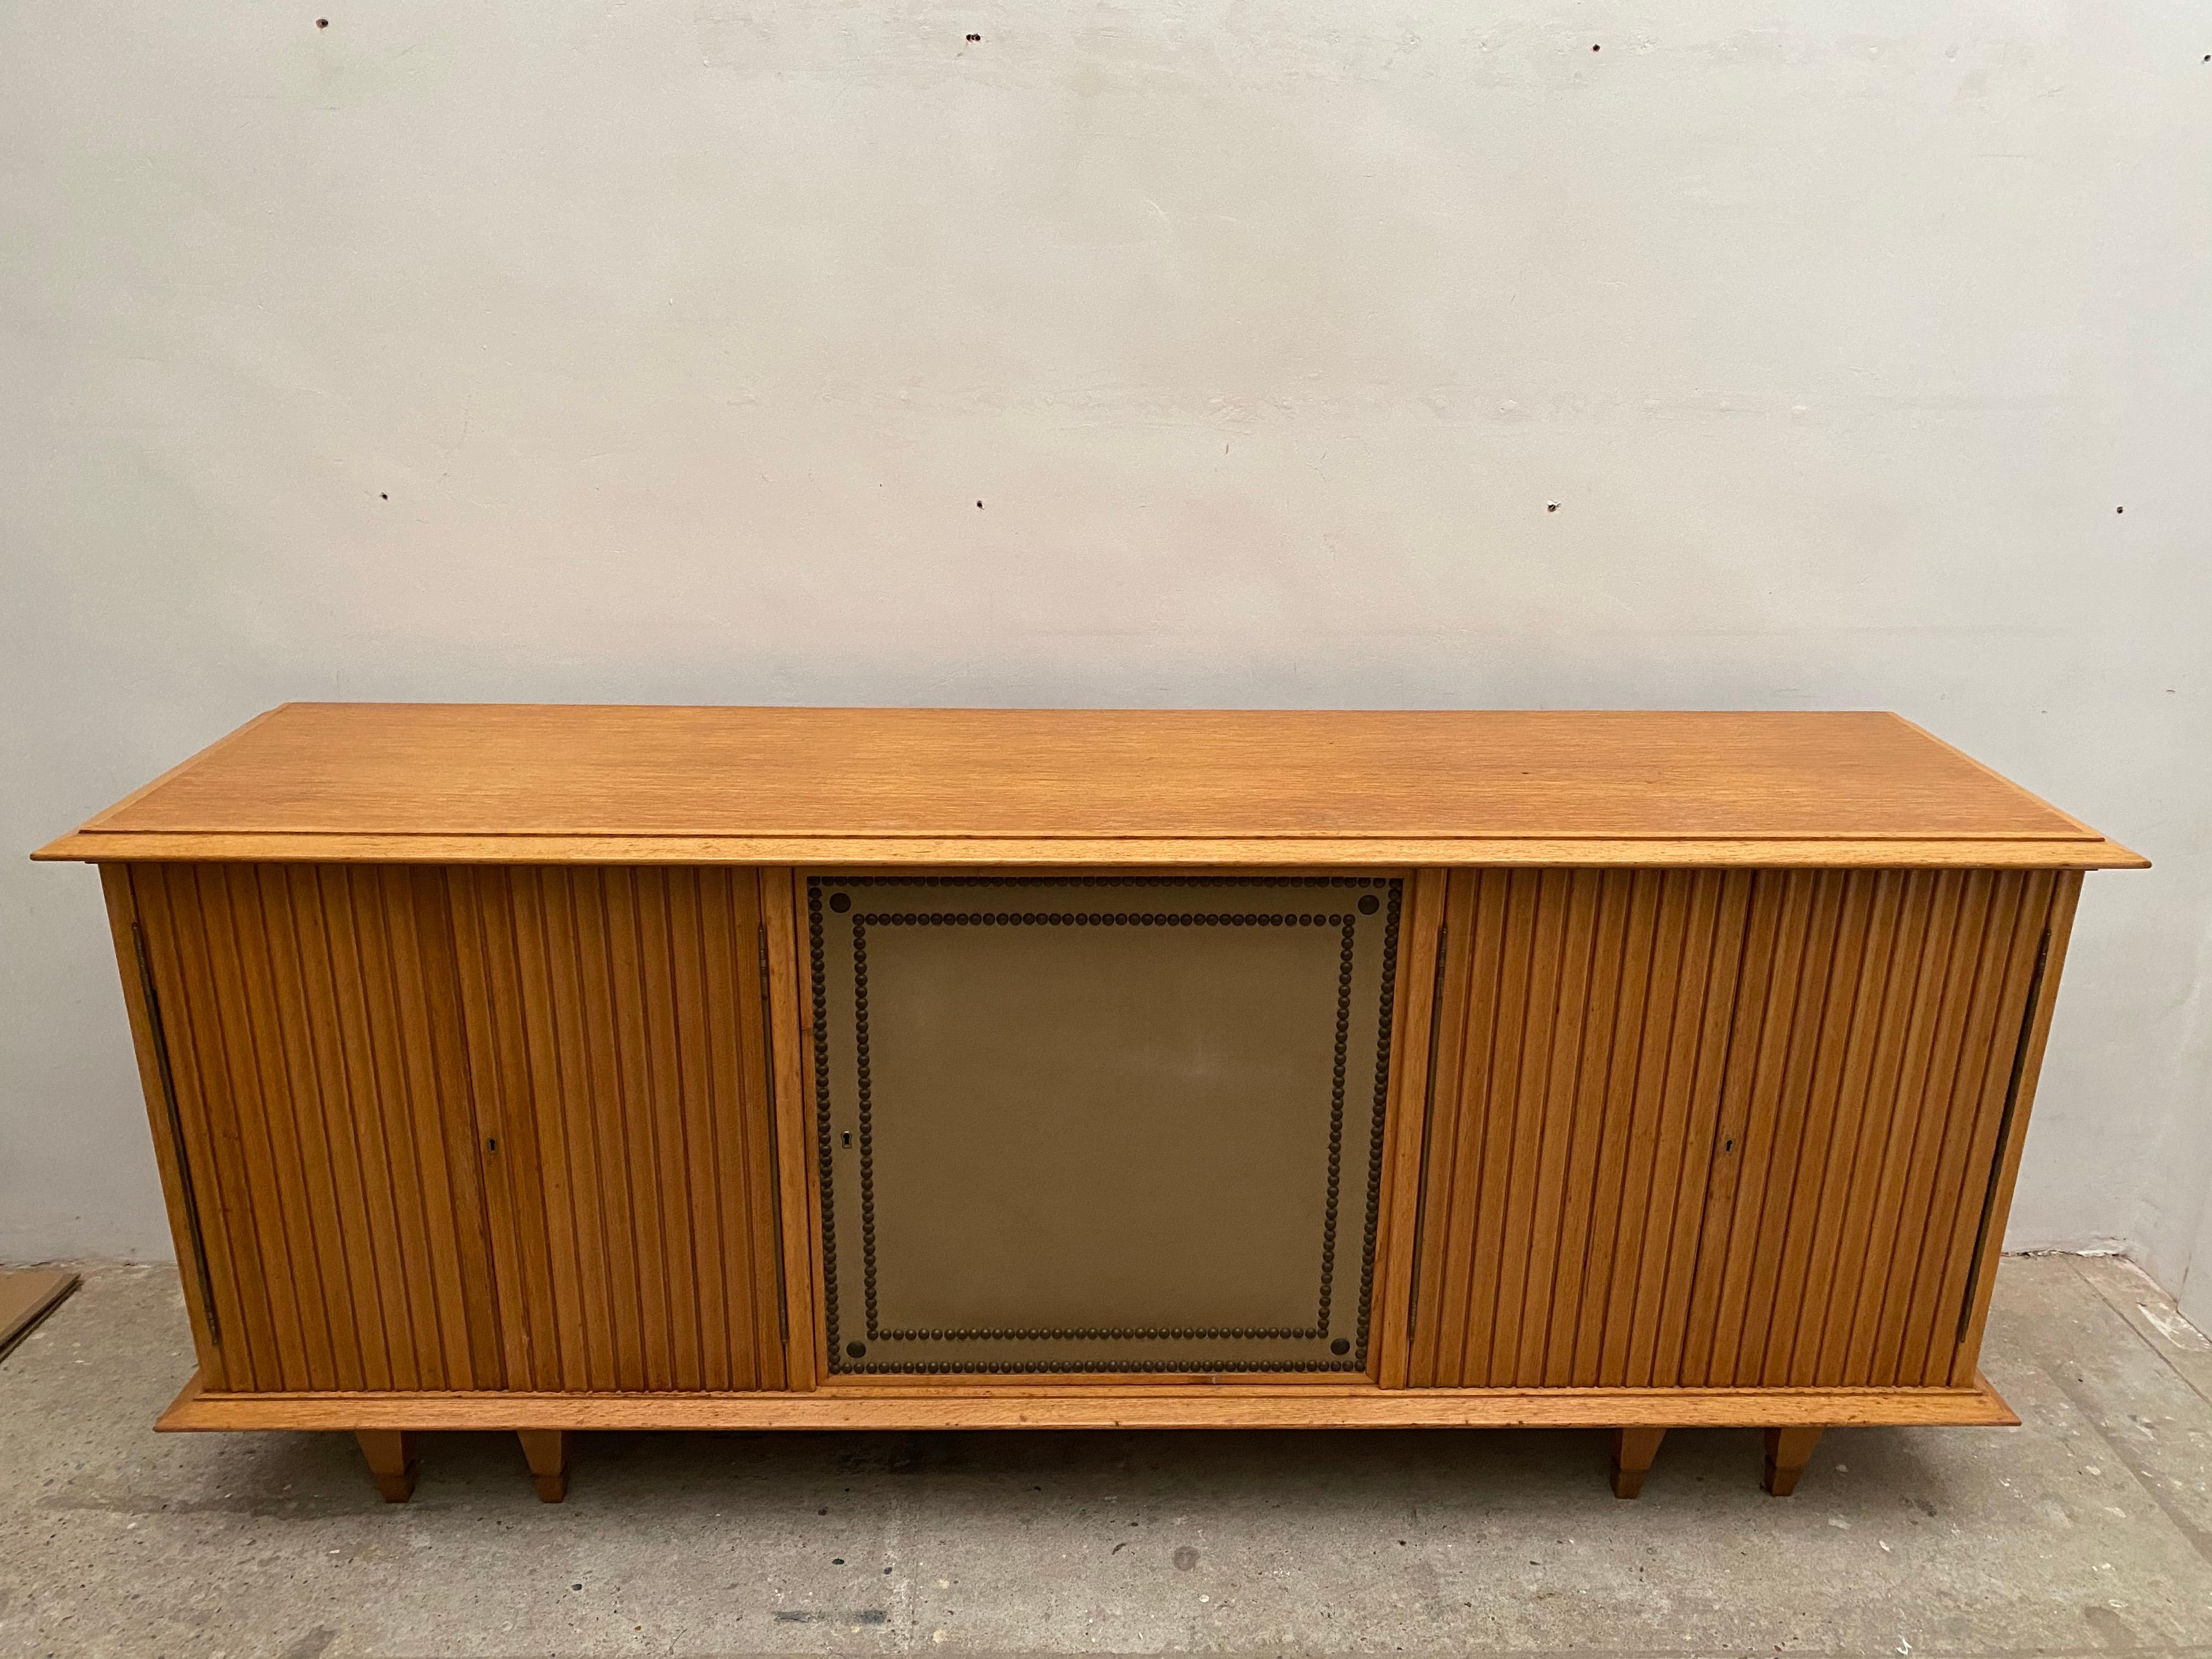 Brutalist Large Sideboard with Slatted Front 1940s De Coene, Belgium In Good Condition For Sale In Antwerp, BE